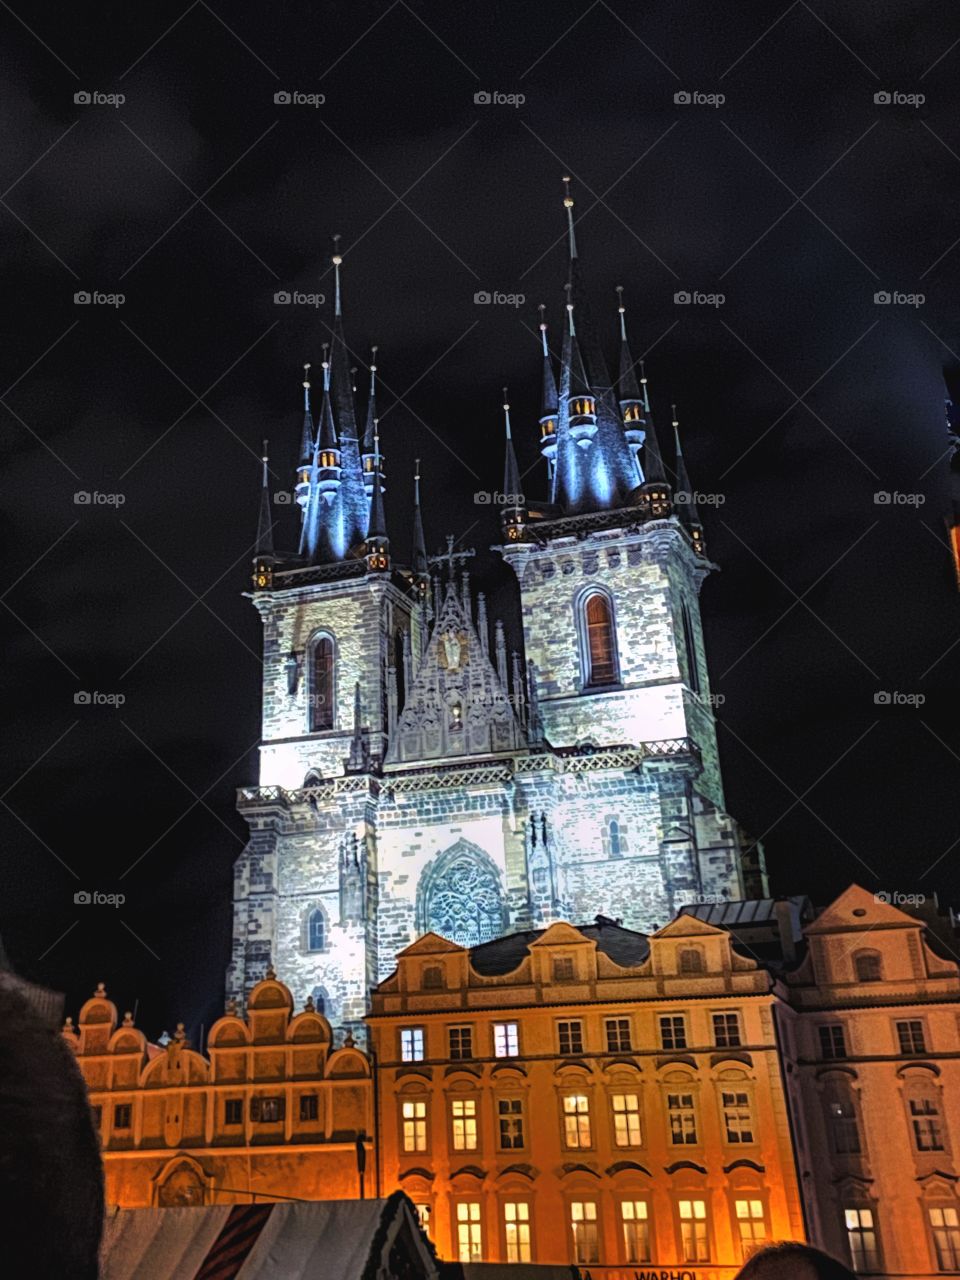 A photo with a 200 year old castle, approximately, located in the center of Prague, being watched by tourists from all over the world! The castle has not been renovated and thus tells the story of hundreds of years.